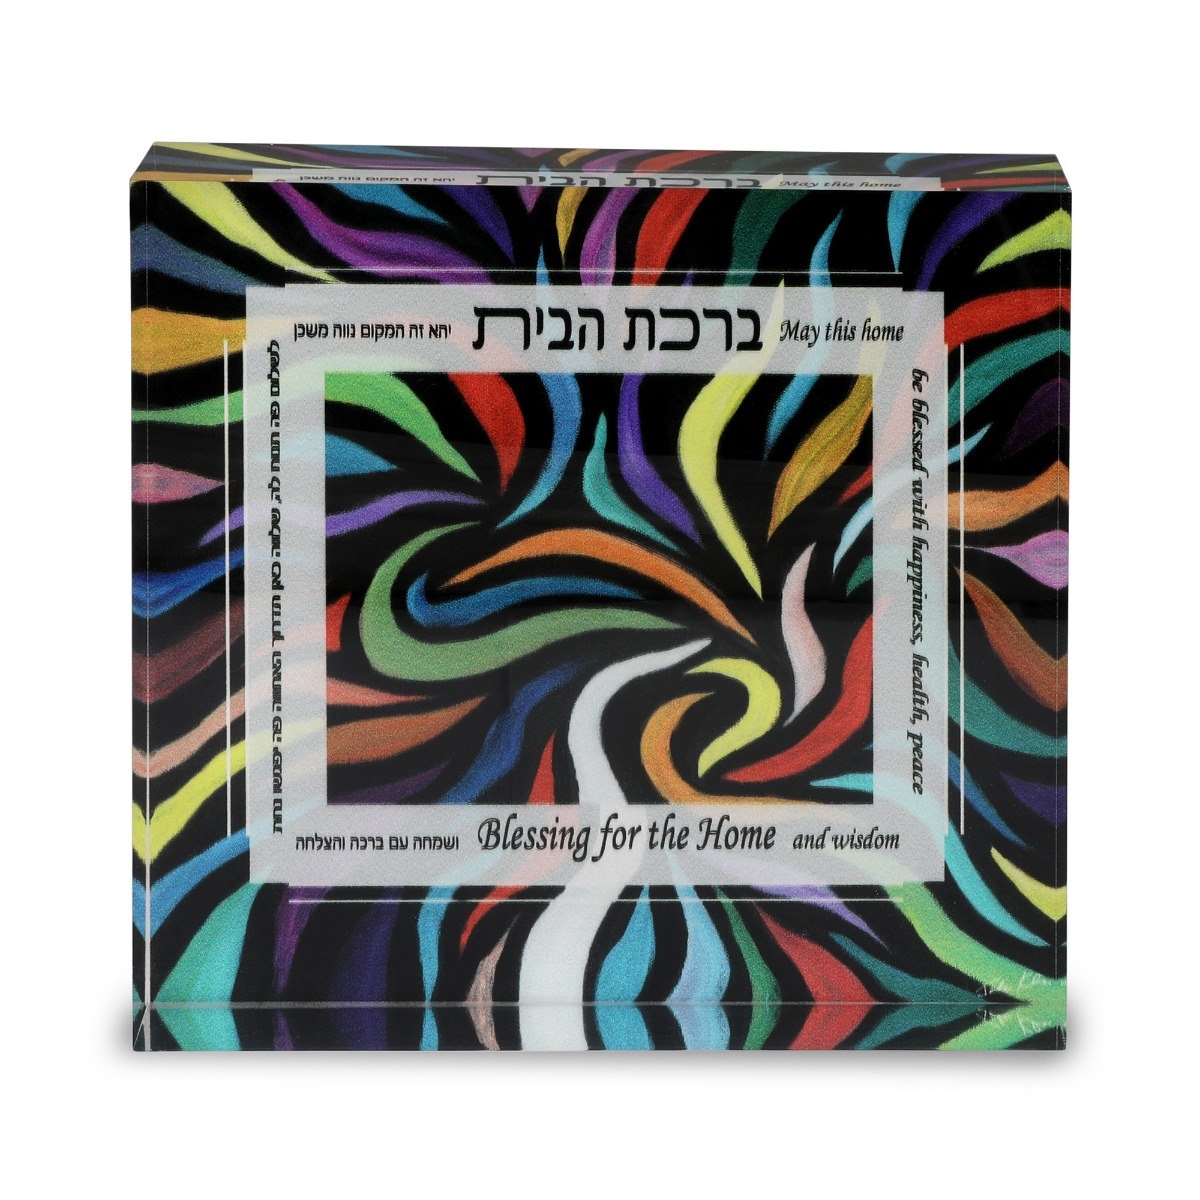 Jordana Klein Home Blessing Glassy Cube With Multicolored Swirling Design (Hebrew/English) - 1